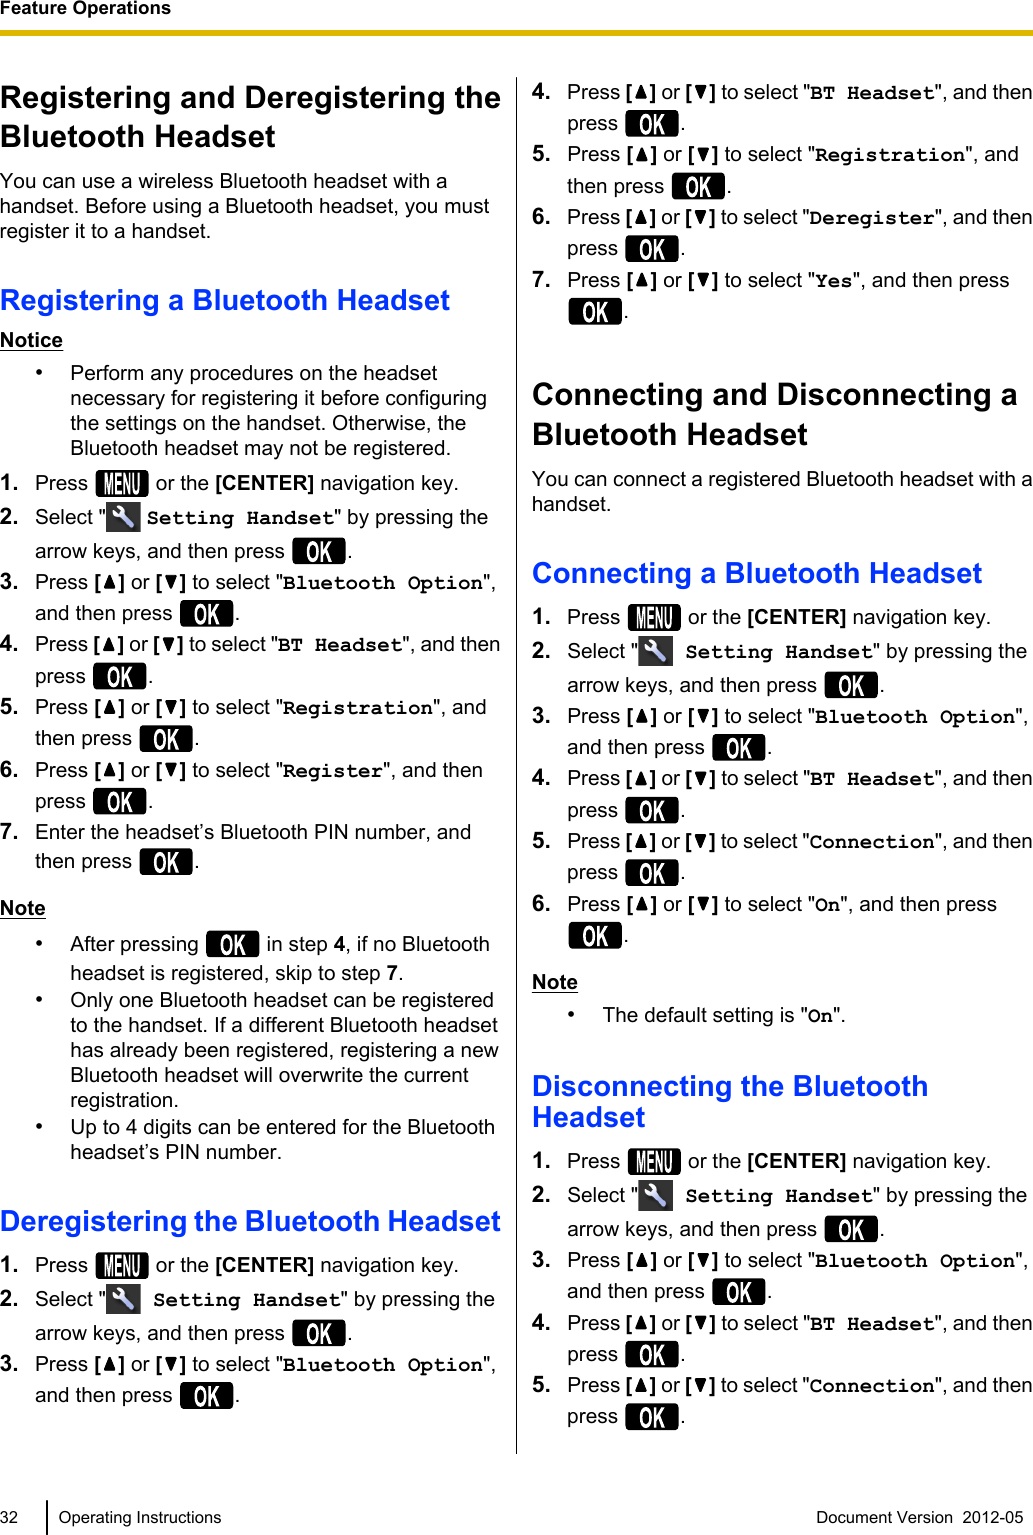 Registering and Deregistering theBluetooth HeadsetYou can use a wireless Bluetooth headset with ahandset. Before using a Bluetooth headset, you mustregister it to a handset.Registering a Bluetooth HeadsetNotice•Perform any procedures on the headsetnecessary for registering it before configuringthe settings on the handset. Otherwise, theBluetooth headset may not be registered.1. Press   or the [CENTER] navigation key.2. Select &quot;  Setting Handset&quot; by pressing thearrow keys, and then press  .3. Press [ ] or [ ] to select &quot;Bluetooth Option&quot;,and then press  .4. Press [ ] or [] to select &quot;BT Headset&quot;, and thenpress  .5. Press [ ] or [ ] to select &quot;Registration&quot;, andthen press  .6. Press [ ] or [ ] to select &quot;Register&quot;, and thenpress  .7. Enter the headset’s Bluetooth PIN number, andthen press  .Note•After pressing   in step 4, if no Bluetoothheadset is registered, skip to step 7.•Only one Bluetooth headset can be registeredto the handset. If a different Bluetooth headsethas already been registered, registering a newBluetooth headset will overwrite the currentregistration.•Up to 4 digits can be entered for the Bluetoothheadset’s PIN number.Deregistering the Bluetooth Headset1. Press   or the [CENTER] navigation key.2. Select &quot;  Setting Handset&quot; by pressing thearrow keys, and then press  .3. Press [ ] or [ ] to select &quot;Bluetooth Option&quot;,and then press  .4. Press [ ] or [] to select &quot;BT Headset&quot;, and thenpress  .5. Press [] or [ ] to select &quot;Registration&quot;, andthen press  .6. Press [] or [] to select &quot;Deregister&quot;, and thenpress  .7. Press [] or [ ] to select &quot;Yes&quot;, and then press.Connecting and Disconnecting aBluetooth HeadsetYou can connect a registered Bluetooth headset with ahandset.Connecting a Bluetooth Headset1. Press   or the [CENTER] navigation key.2. Select &quot;  Setting Handset&quot; by pressing thearrow keys, and then press  .3. Press [ ] or [ ] to select &quot;Bluetooth Option&quot;,and then press  .4. Press [ ] or [] to select &quot;BT Headset&quot;, and thenpress  .5. Press [ ] or [] to select &quot;Connection&quot;, and thenpress  .6. Press [ ] or [ ] to select &quot;On&quot;, and then press.Note•The default setting is &quot;On&quot;.Disconnecting the BluetoothHeadset1. Press   or the [CENTER] navigation key.2. Select &quot;  Setting Handset&quot; by pressing thearrow keys, and then press  .3. Press [] or [ ] to select &quot;Bluetooth Option&quot;,and then press  .4. Press [] or [] to select &quot;BT Headset&quot;, and thenpress  .5. Press [] or [] to select &quot;Connection&quot;, and thenpress  .32 Operating Instructions Document Version  2012-05  Feature Operations